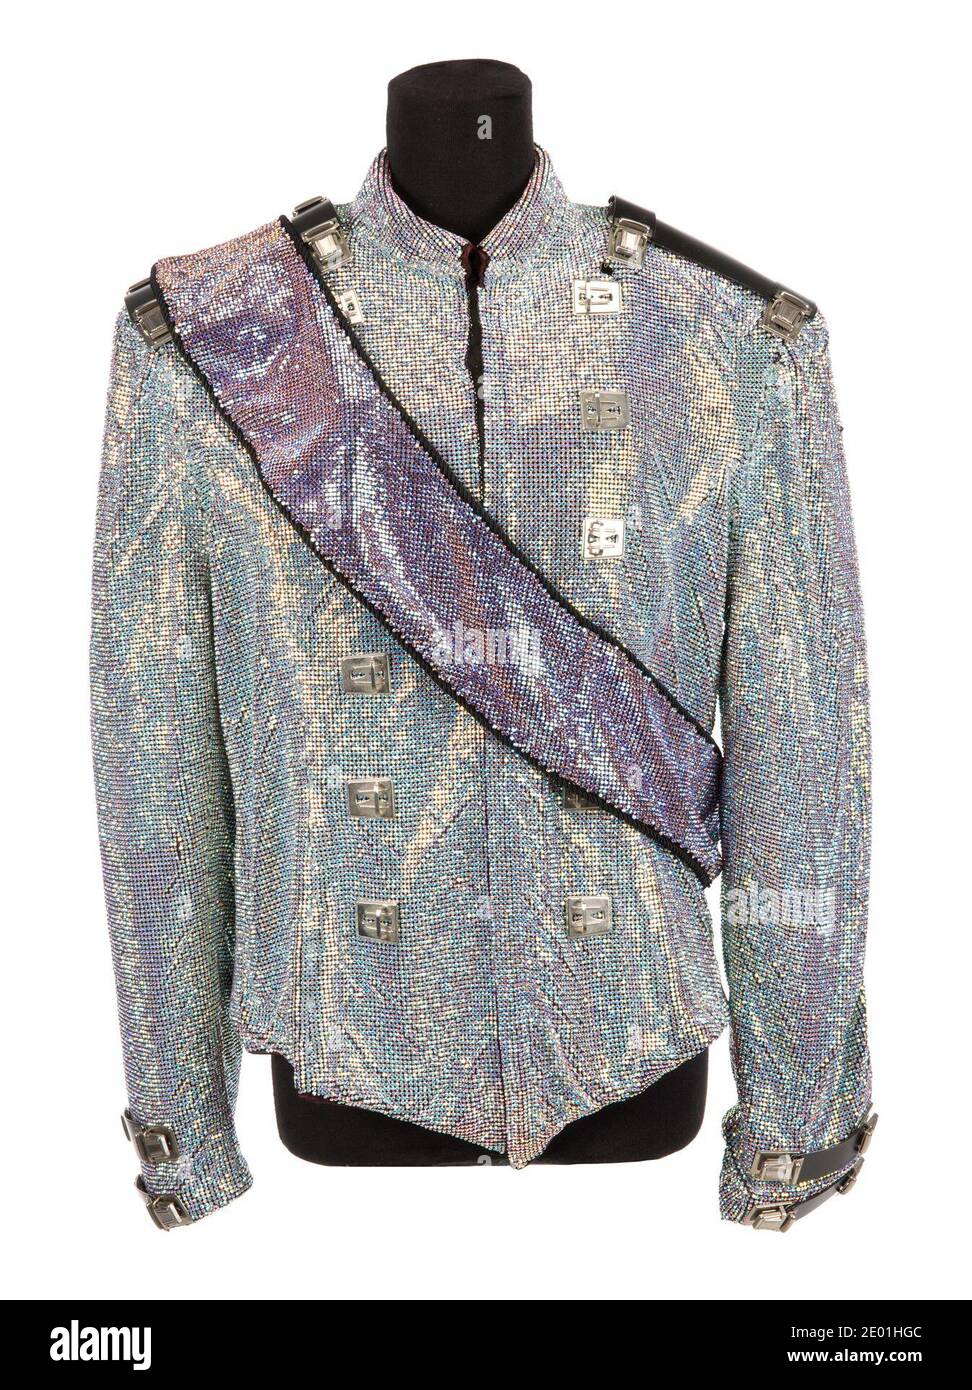 How state museum got Michael Jackson's jacket